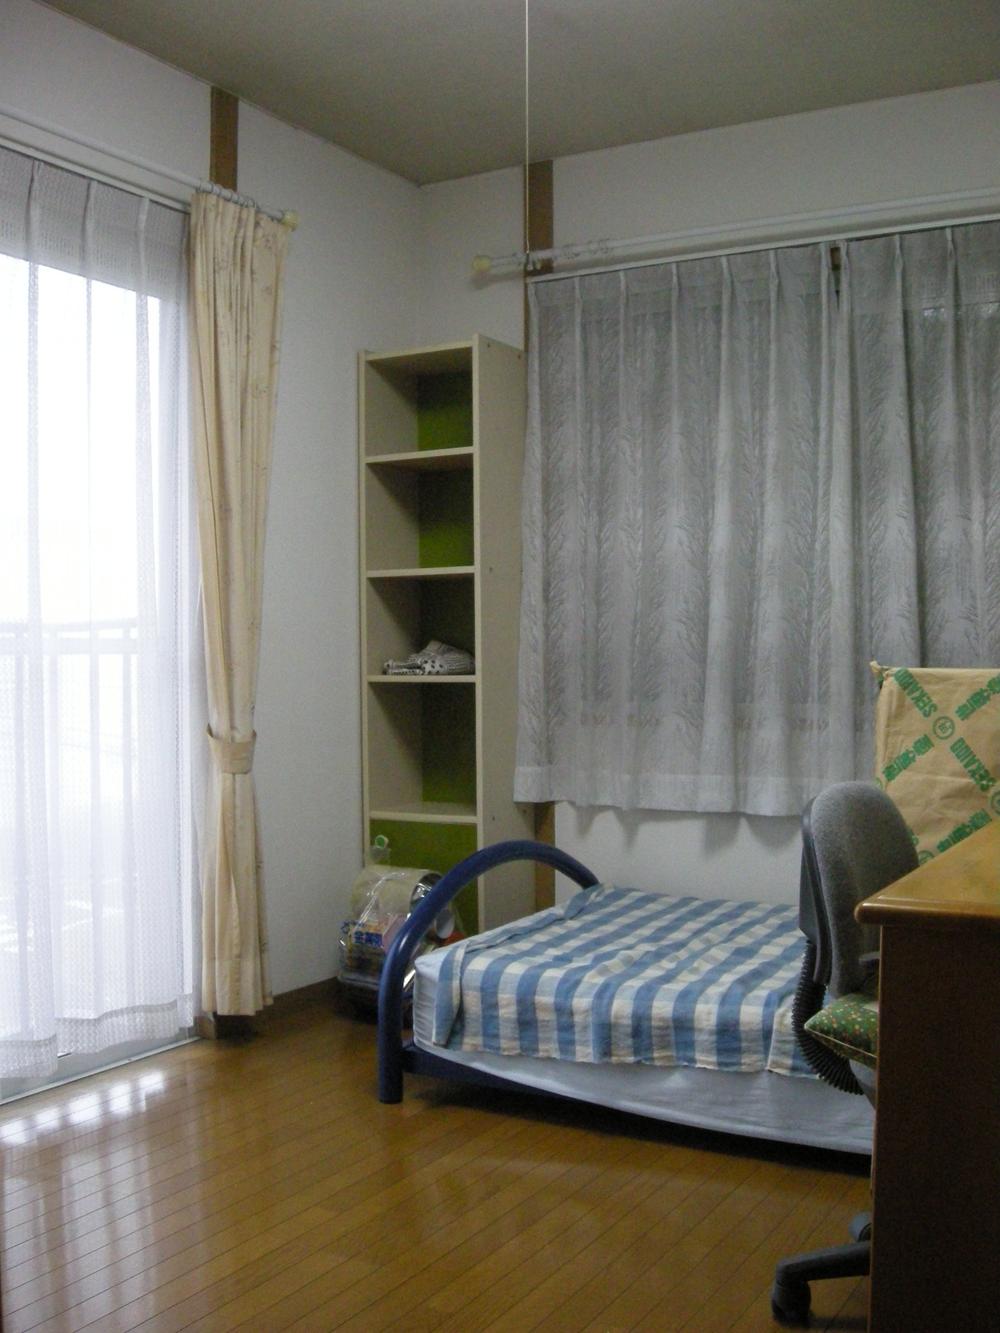 Non-living room. It is the second floor of the Interoceanic. 